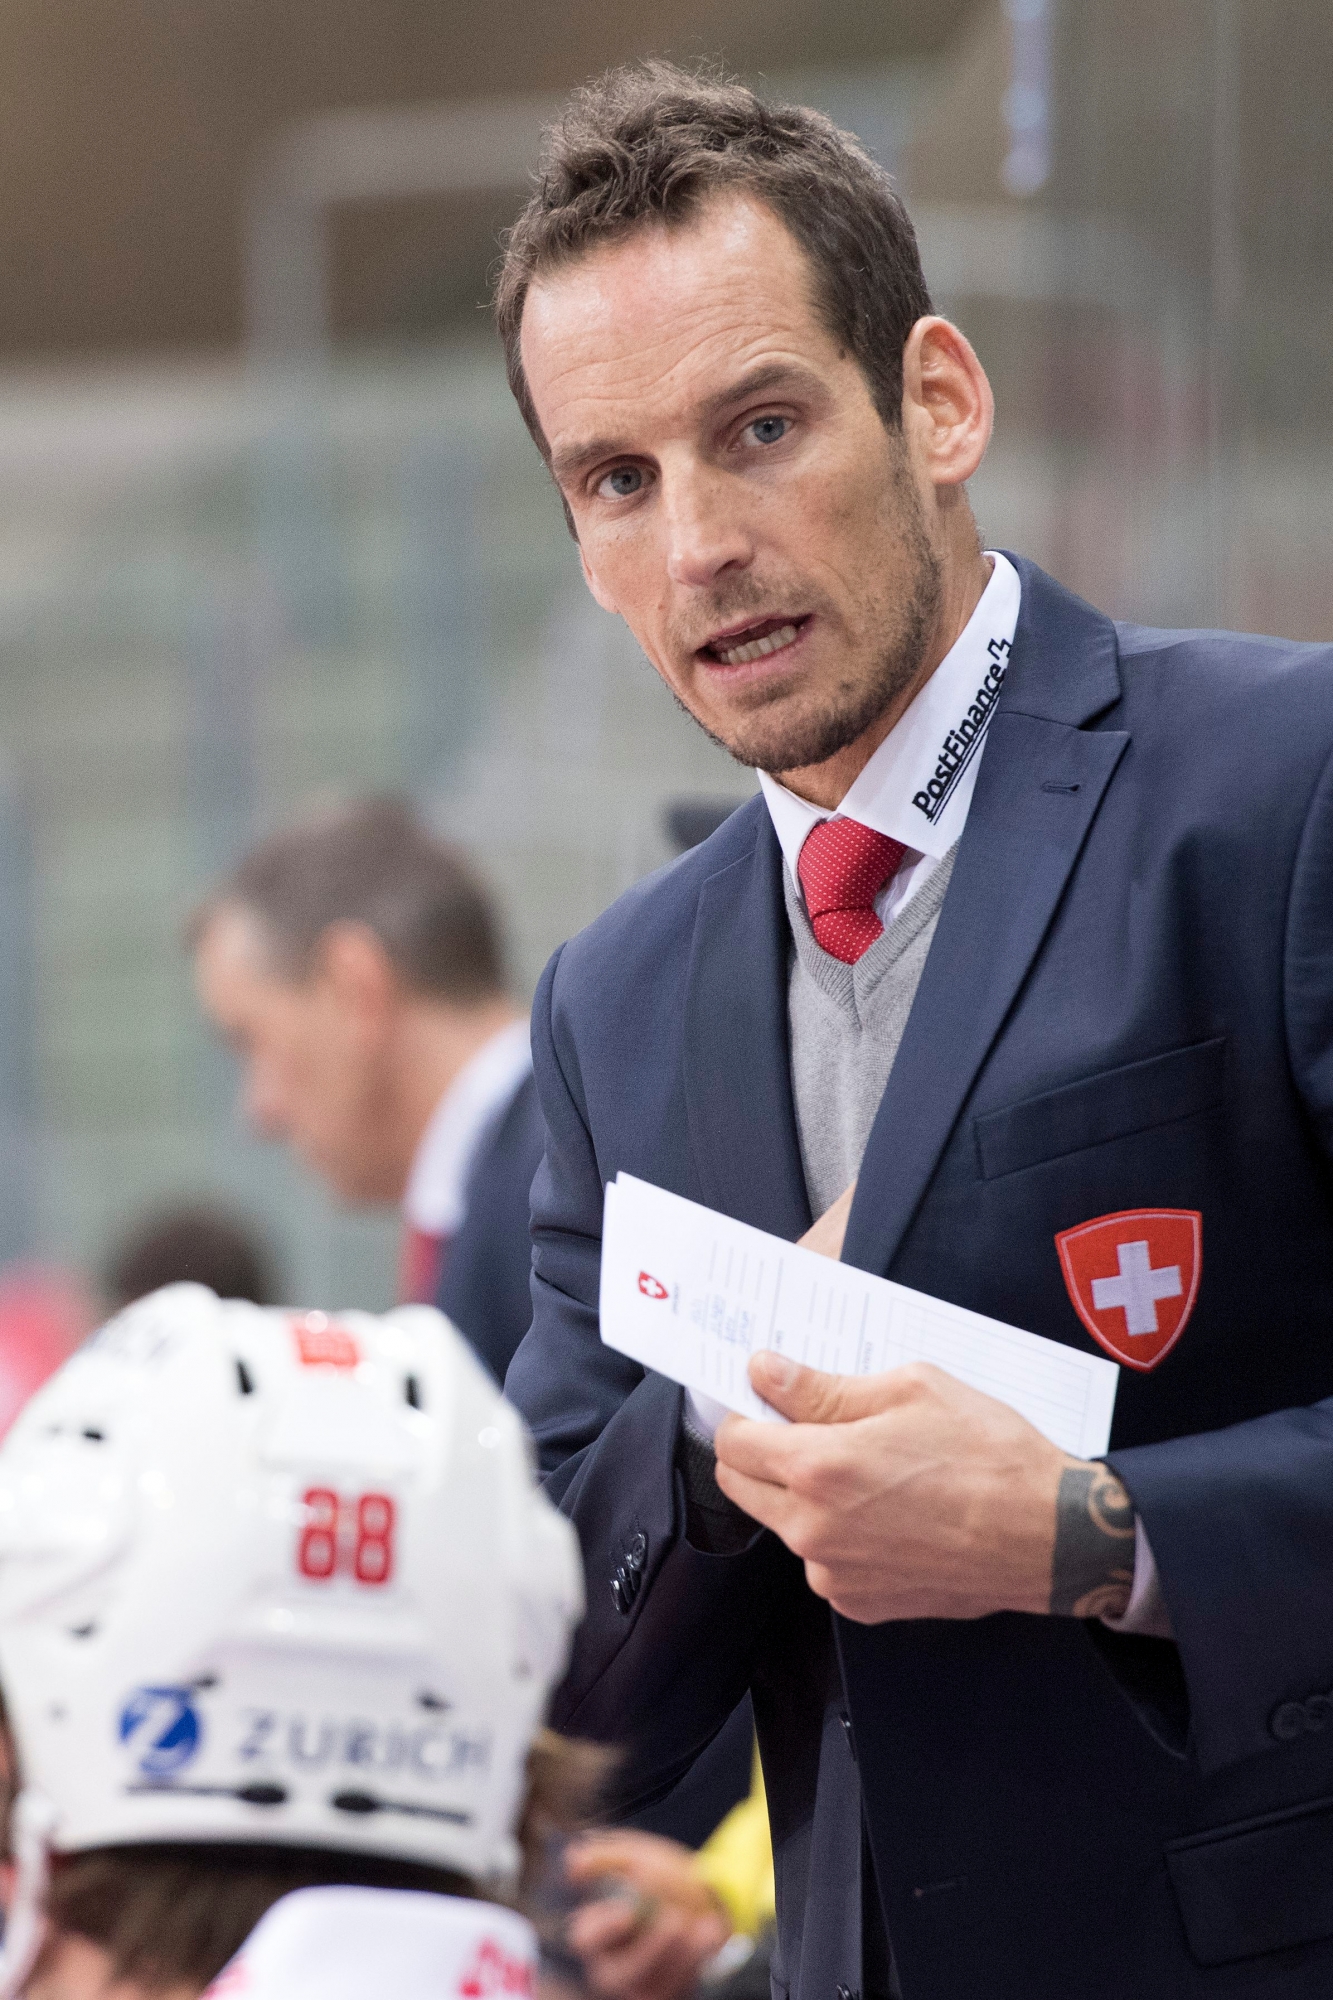 Patrick Fischer, head coach of Switzerland national ice hockey team, during a friendly ice hockey game between Switzerland and Russia, at the Tissot Arena in Bienne, Switzerland, this Saturday, 22. April 2017. (KEYSTONE/Anthony Anex) SWITZERLAND RUSSIA ICE HOCKEY